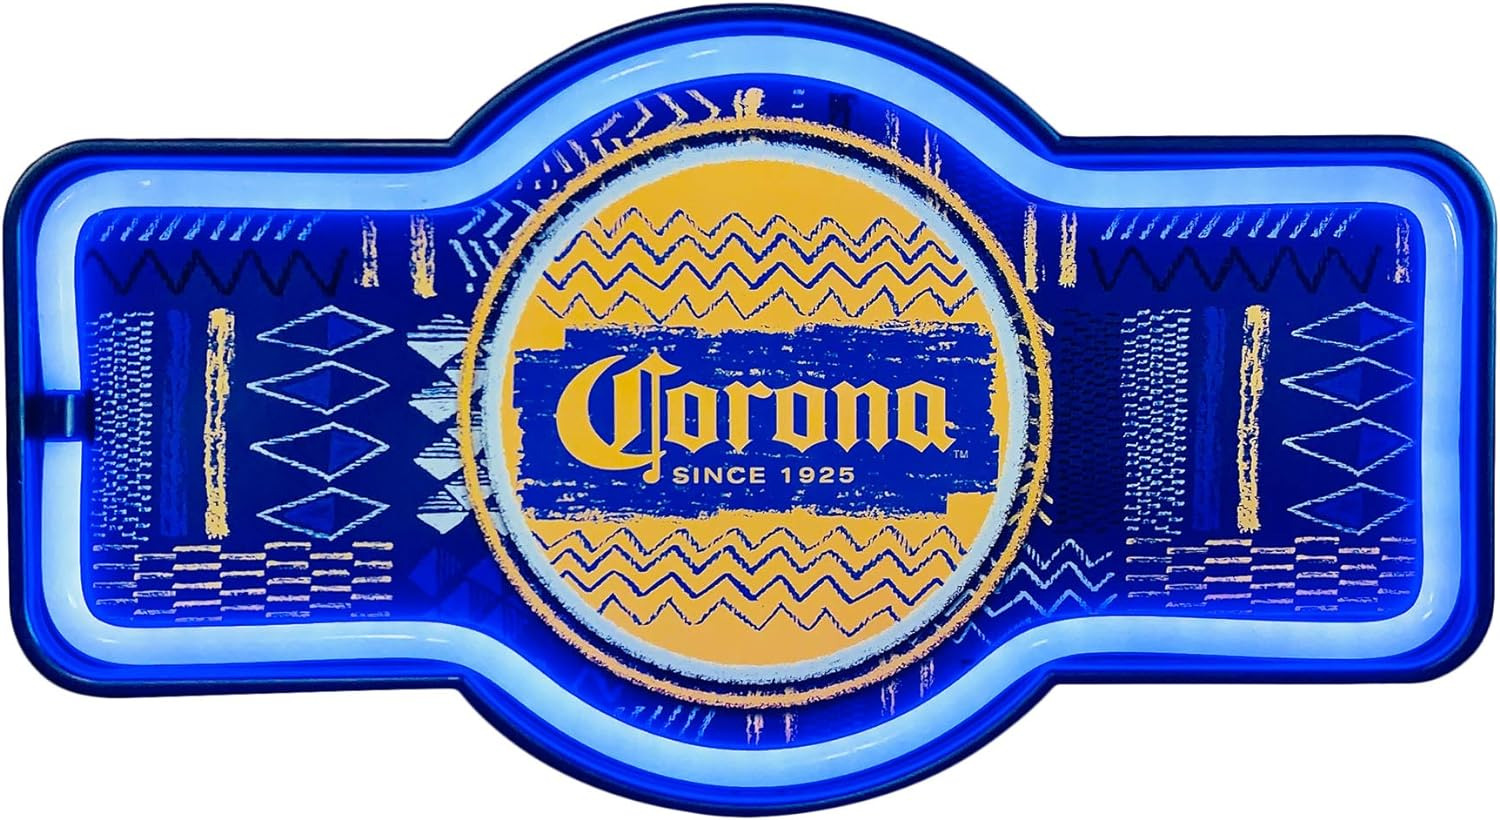 Corona since 1925 Vintage Inspired LED Neon Sign Retro Wall Decor for the Home